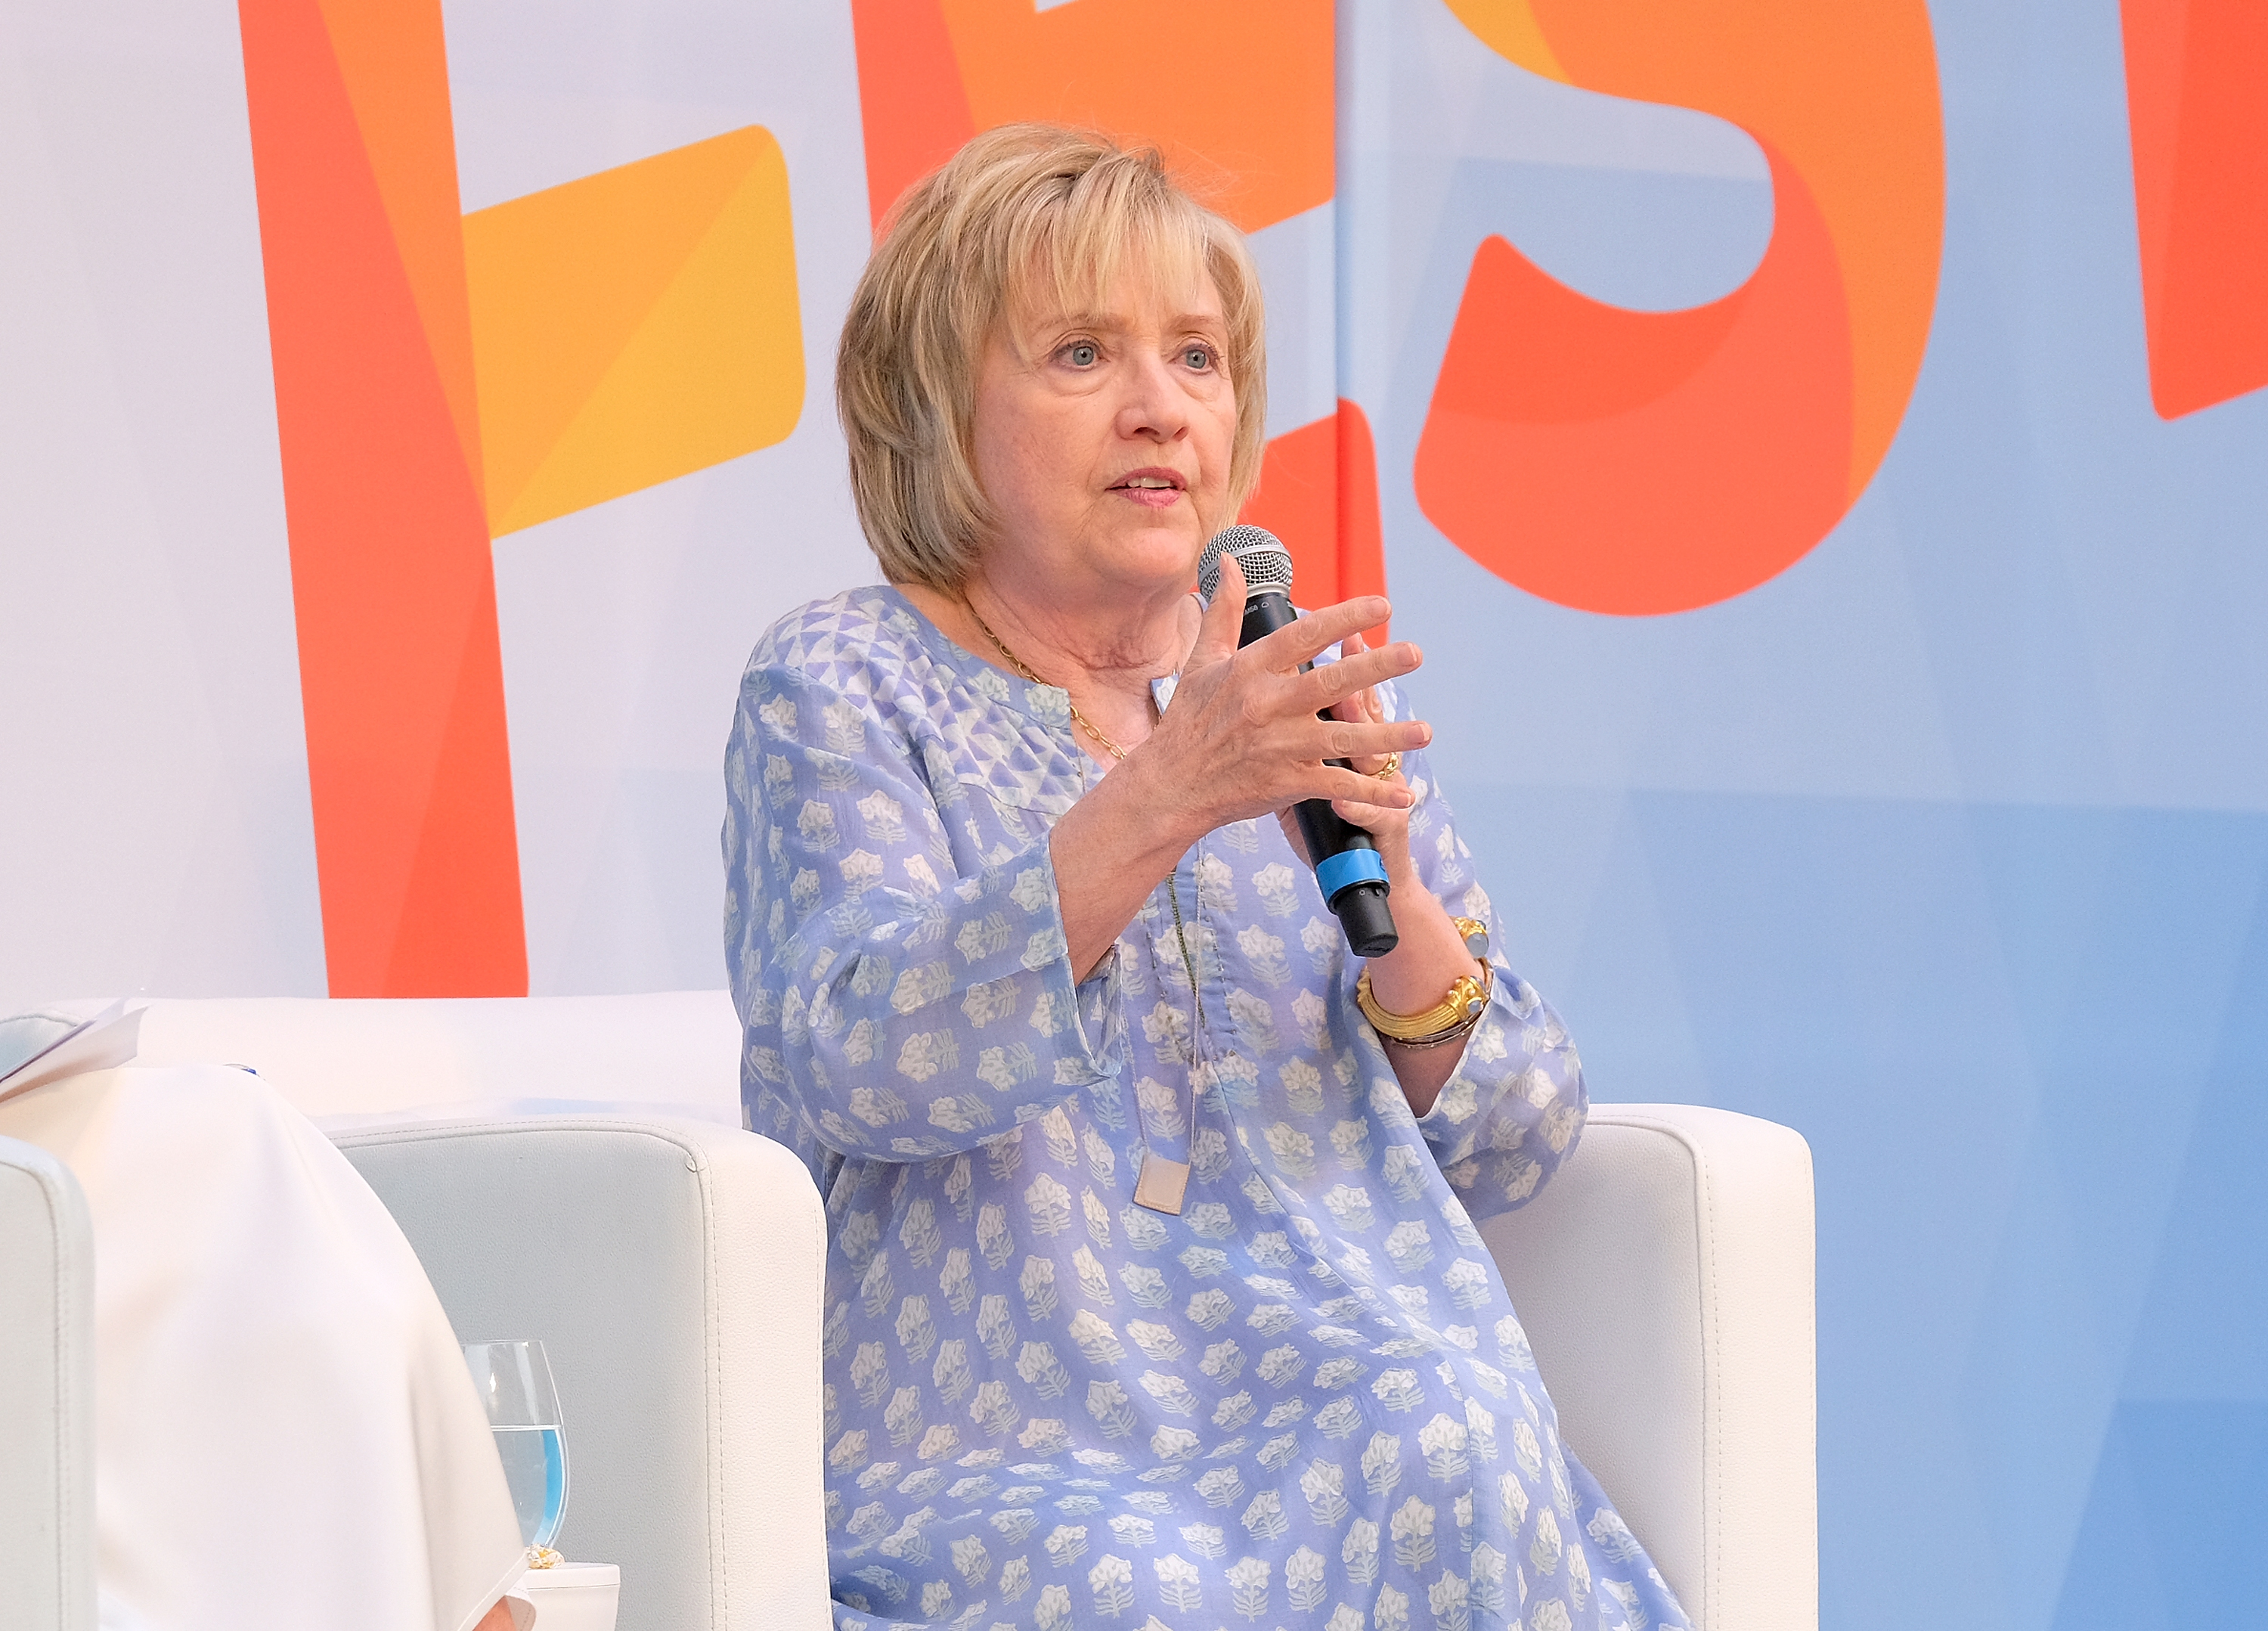 Hillary Clinton speaks onstage during OZY Fest 2018 at Rumsey Playfield, Central Park on July 21, 2018 in New York City. (Photo by Matthew Eisman/Getty Images for Ozy Media)